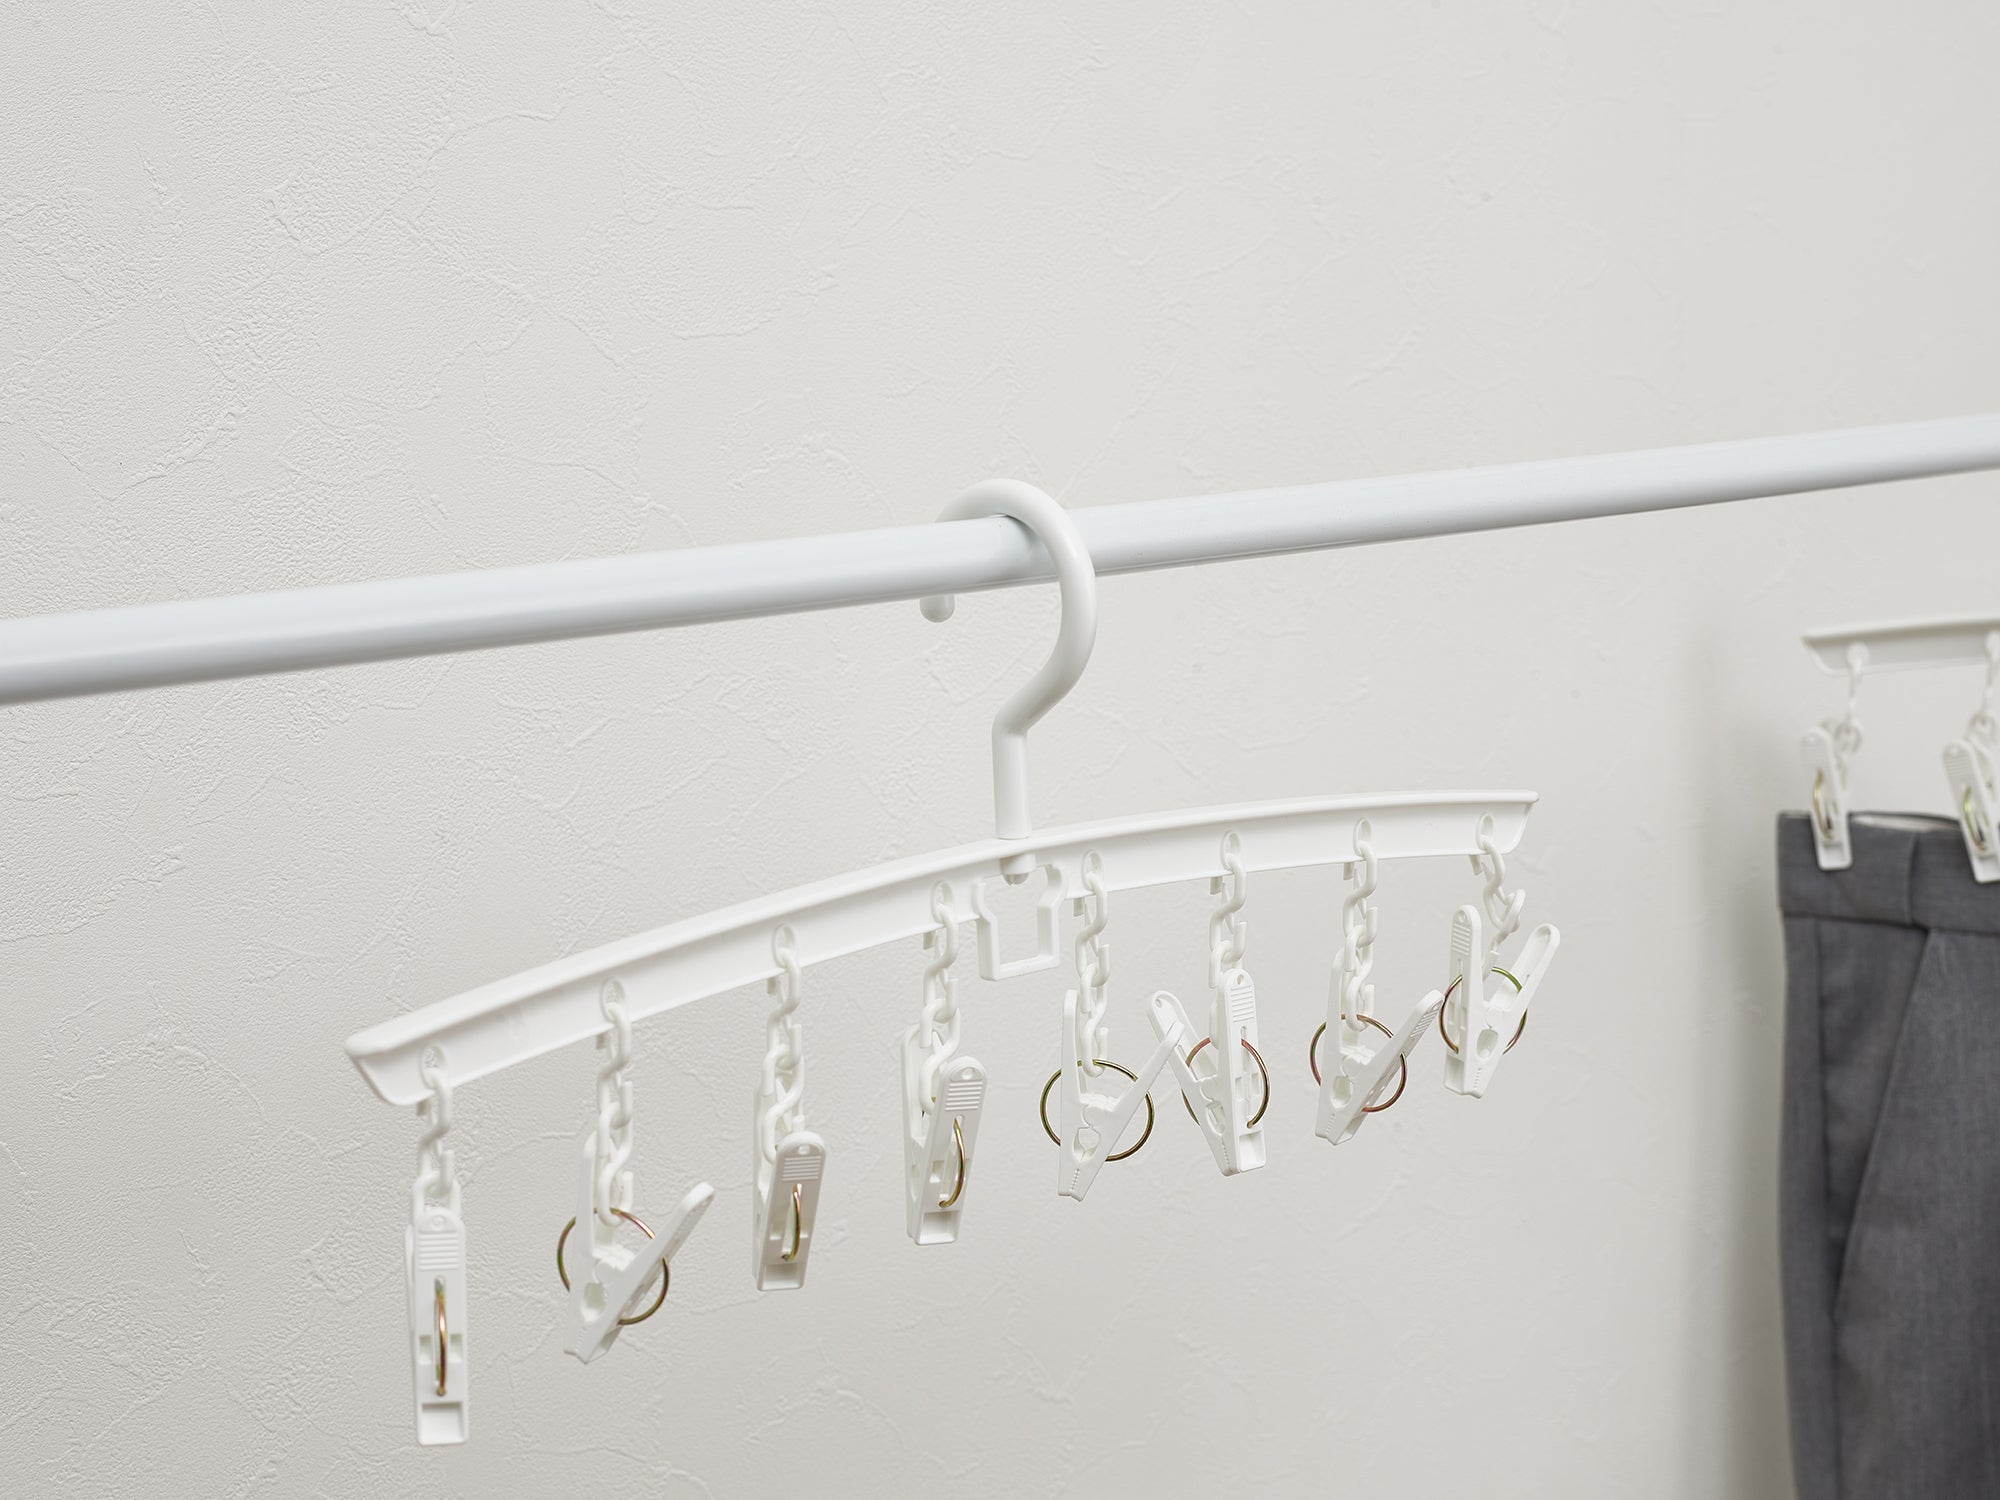 MINISO CLOTHES HANGER WITH 8 CLIPS 2011480710103 CLOTHES HANGERS